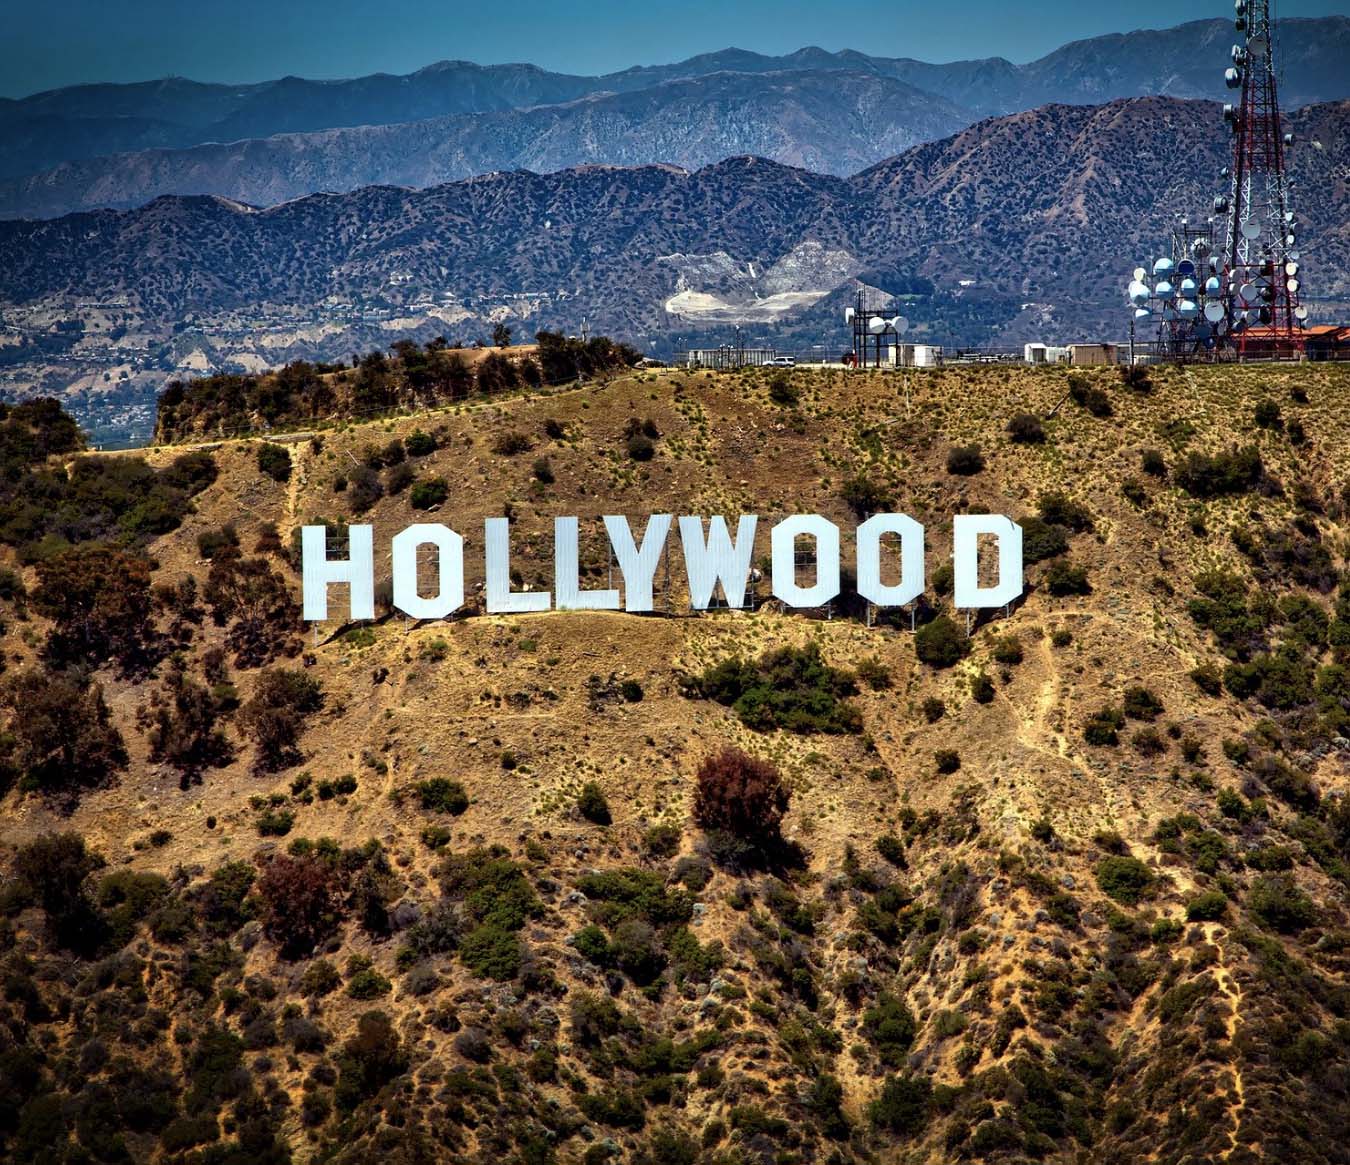 Things to Do in Los Angeles - The Hollywood Sign